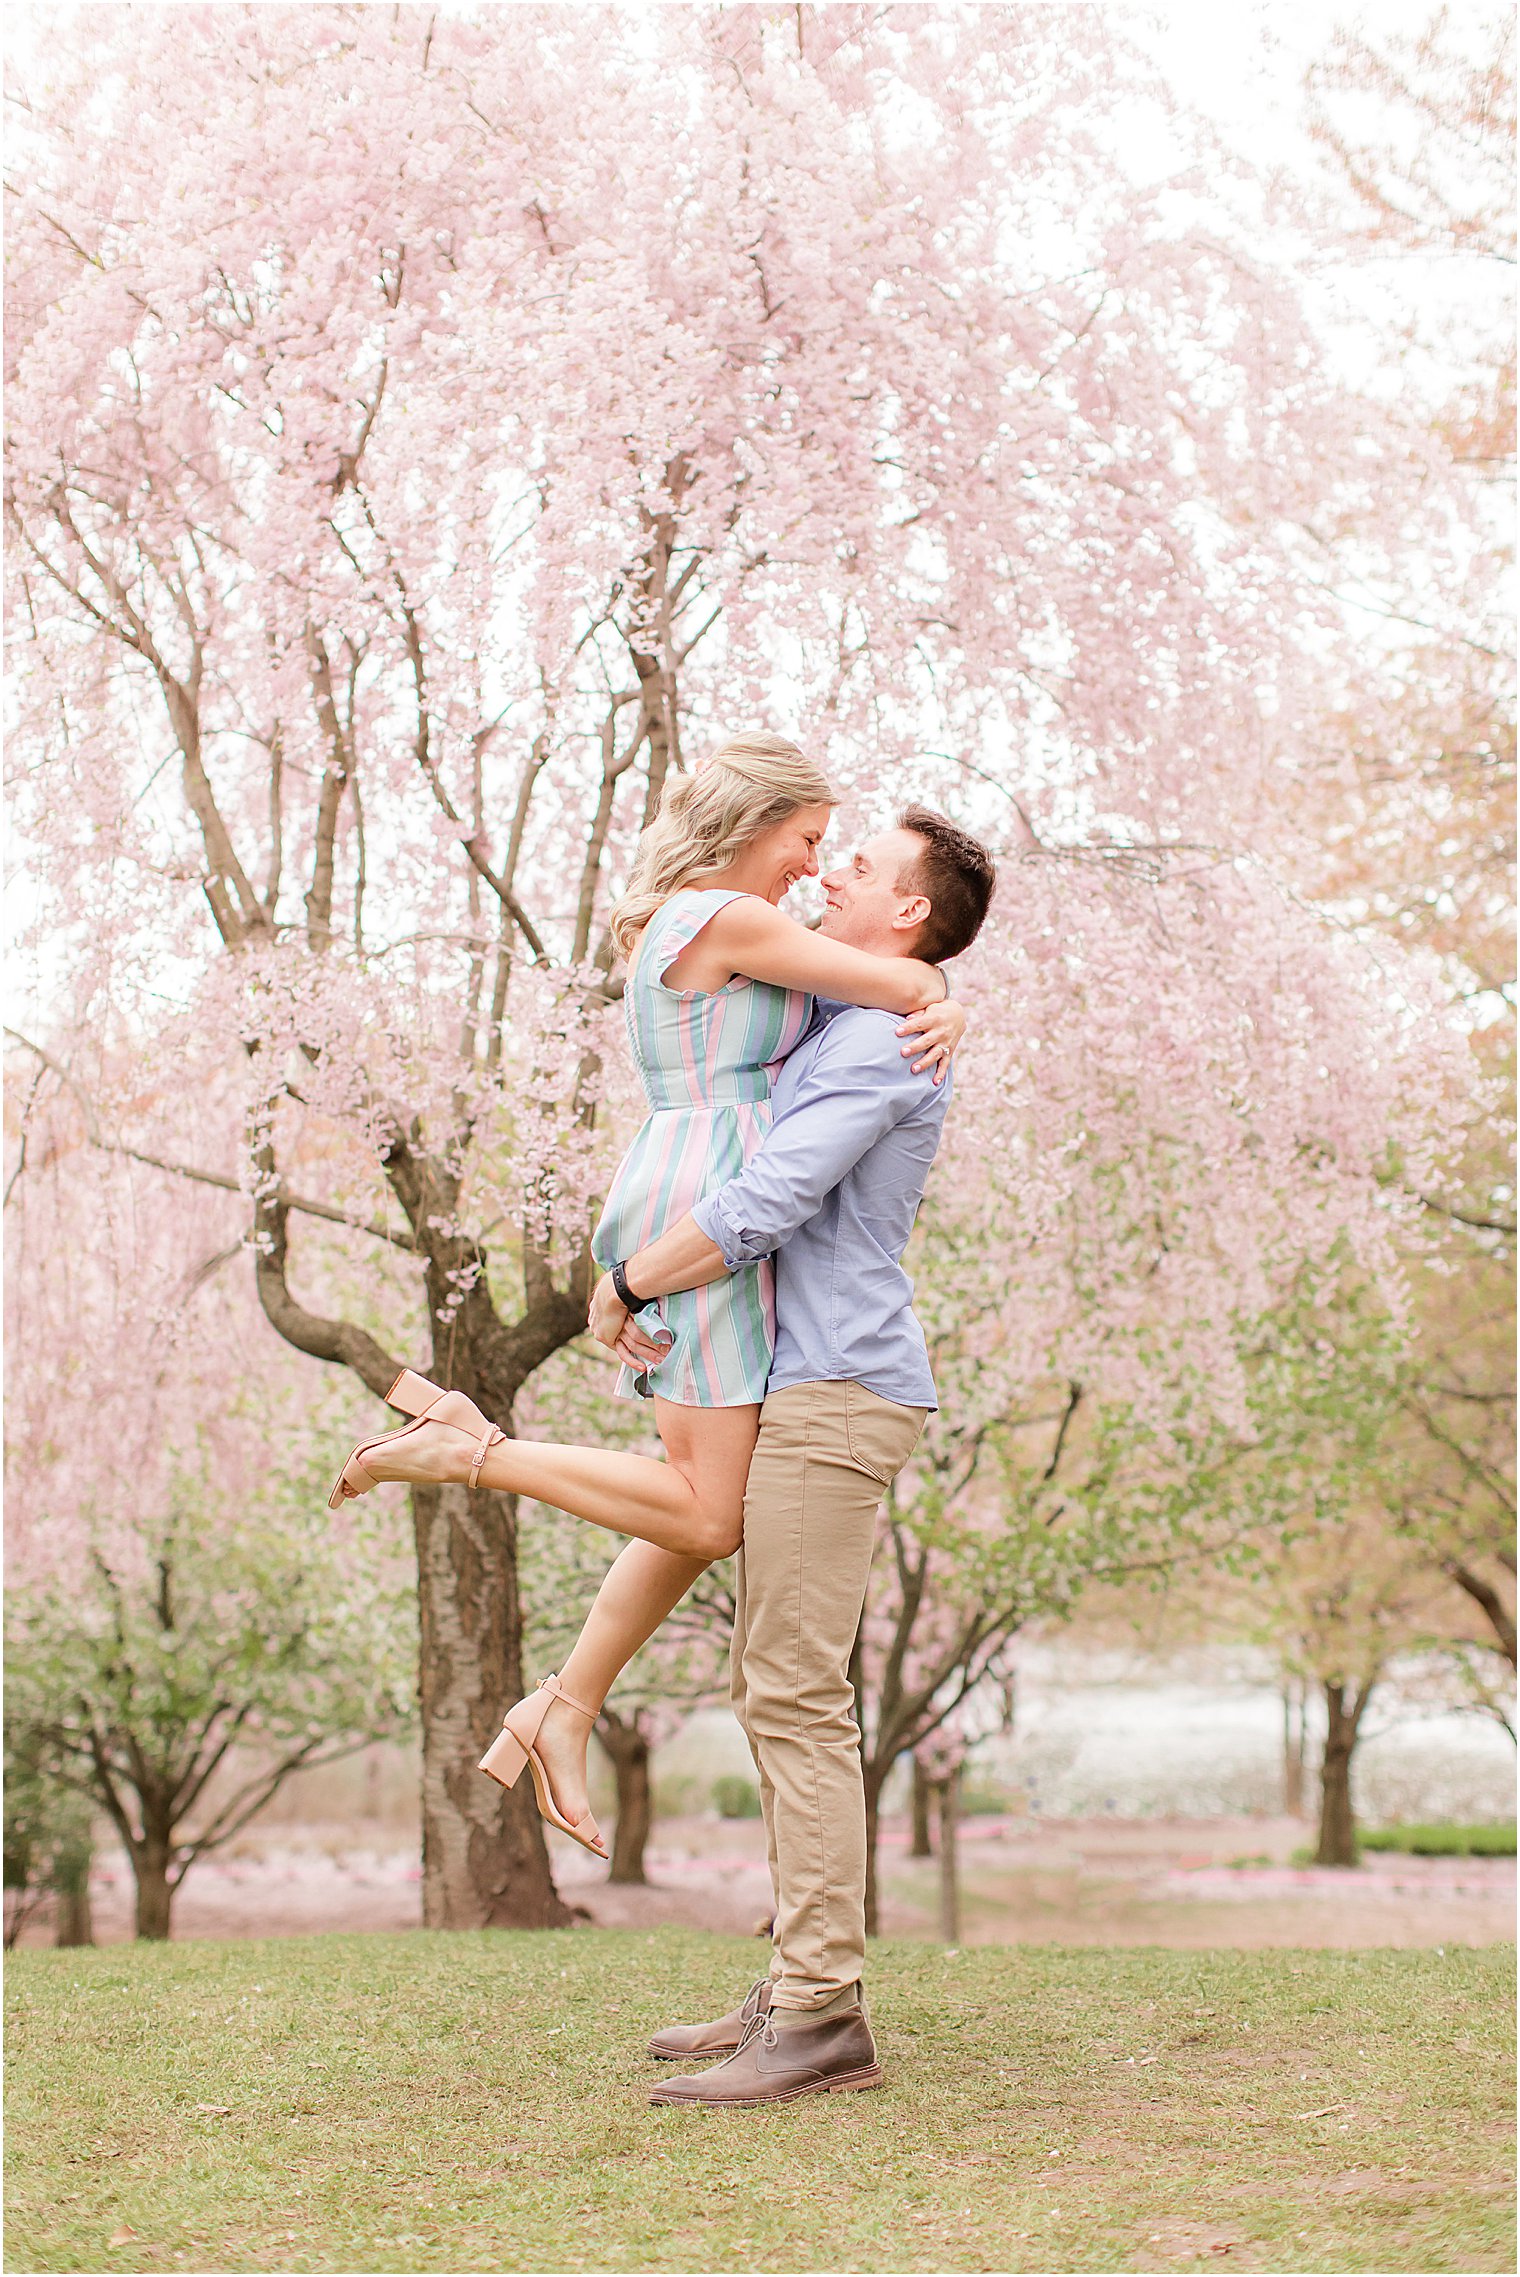 groom lifts bride during engagement session at Branch Brook Park